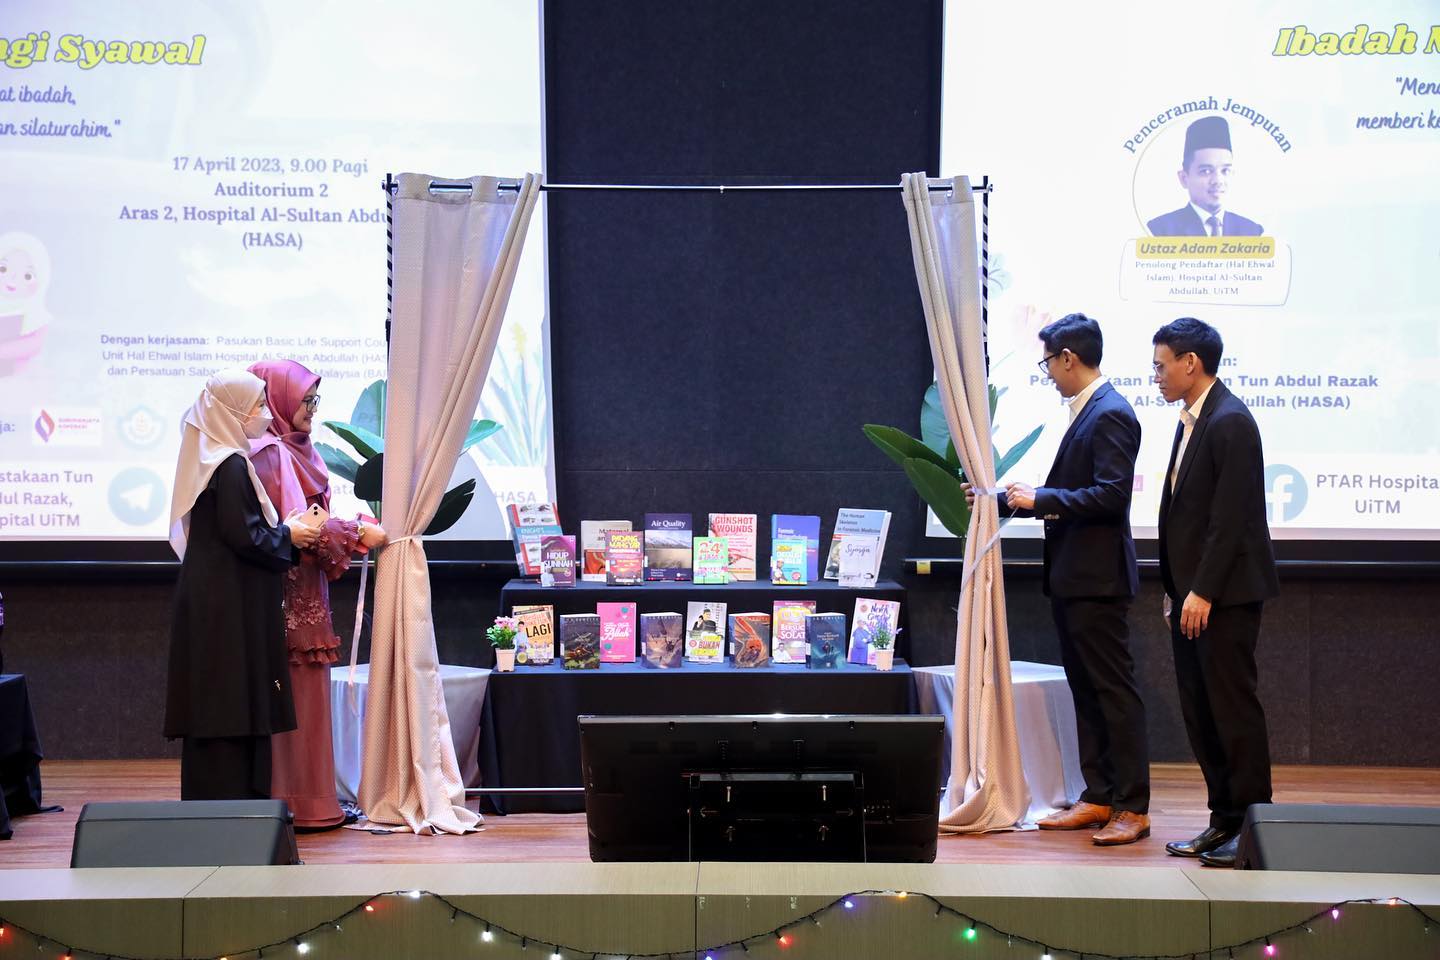 'LET'S READ IN CONJUNCTION WITH WORLD BOOK DAY 2023' PROGRAM TO PROMOTE READING CULTURE AMONG THE COMMUNITY